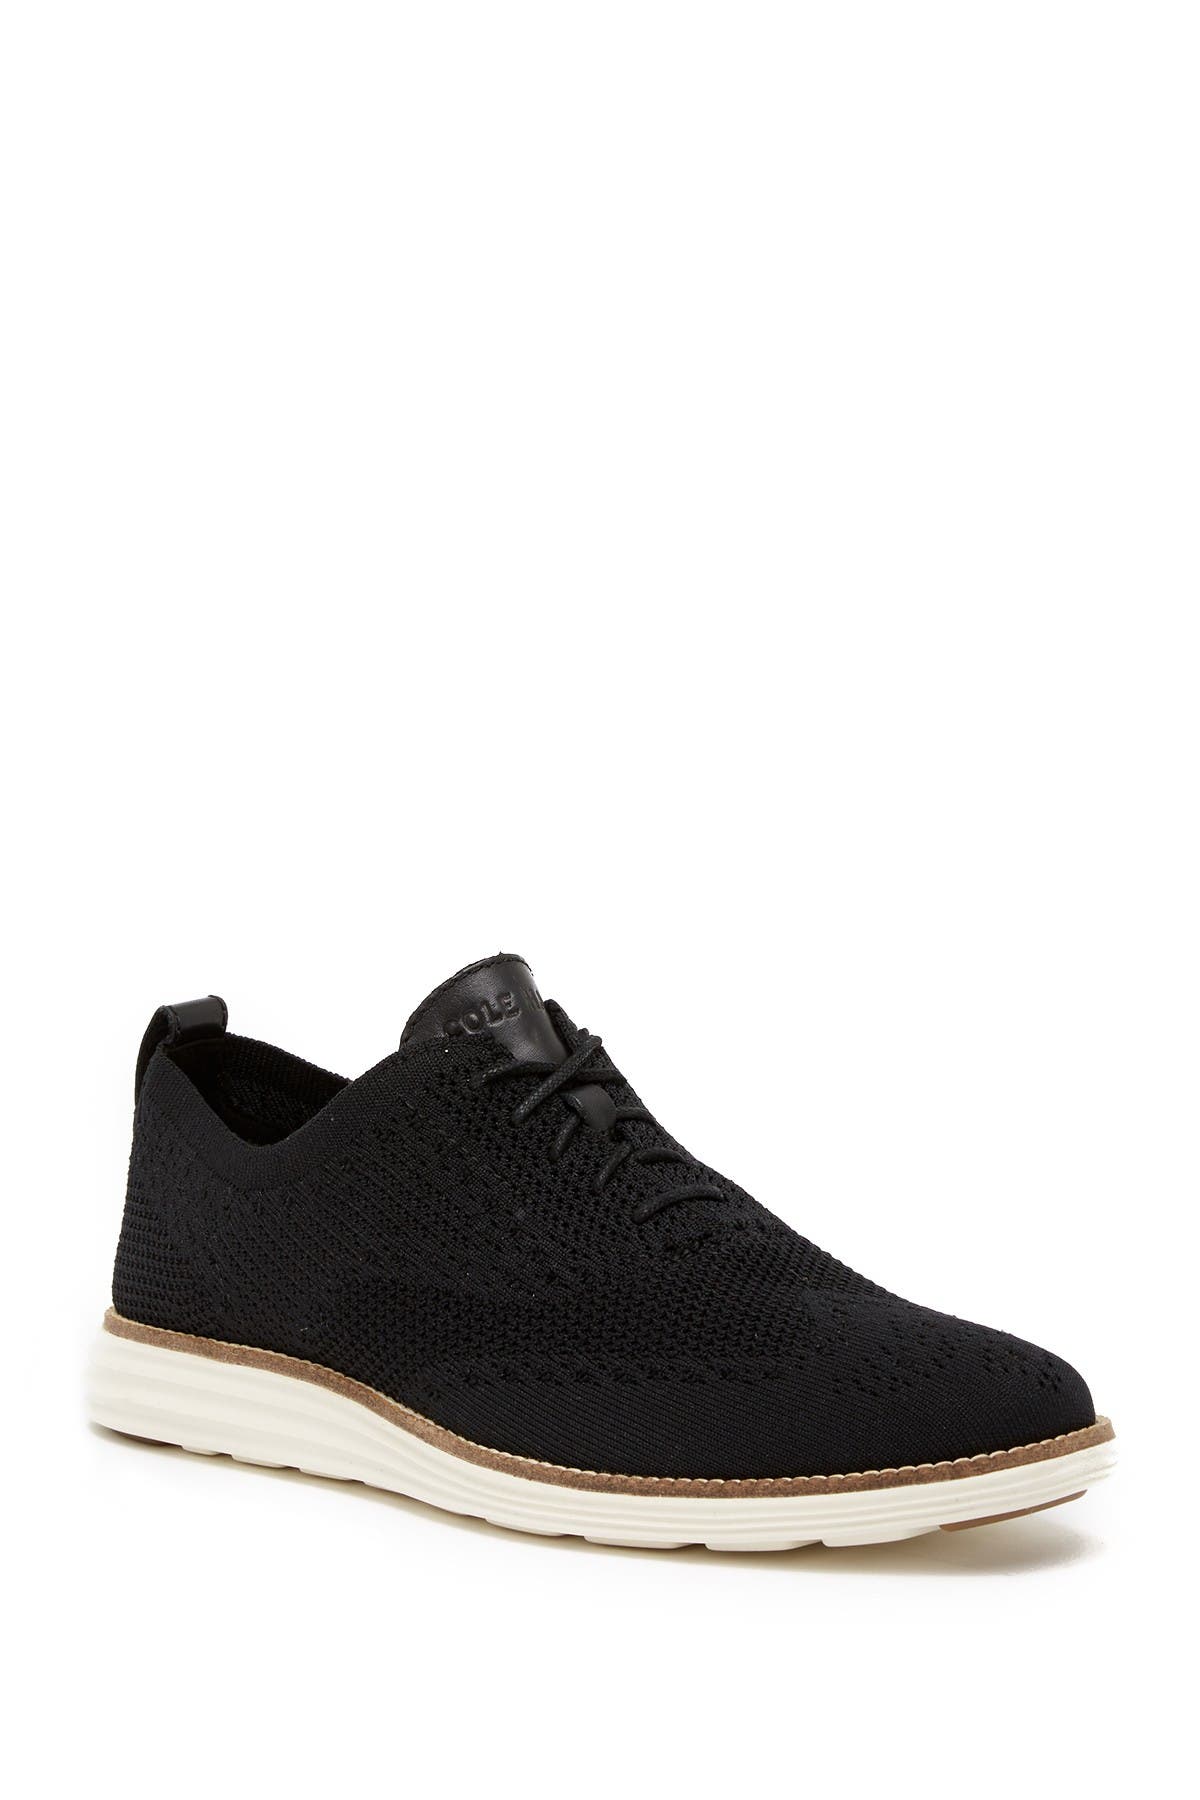 Cole Haan Original Grand Shortwing Oxford In Black